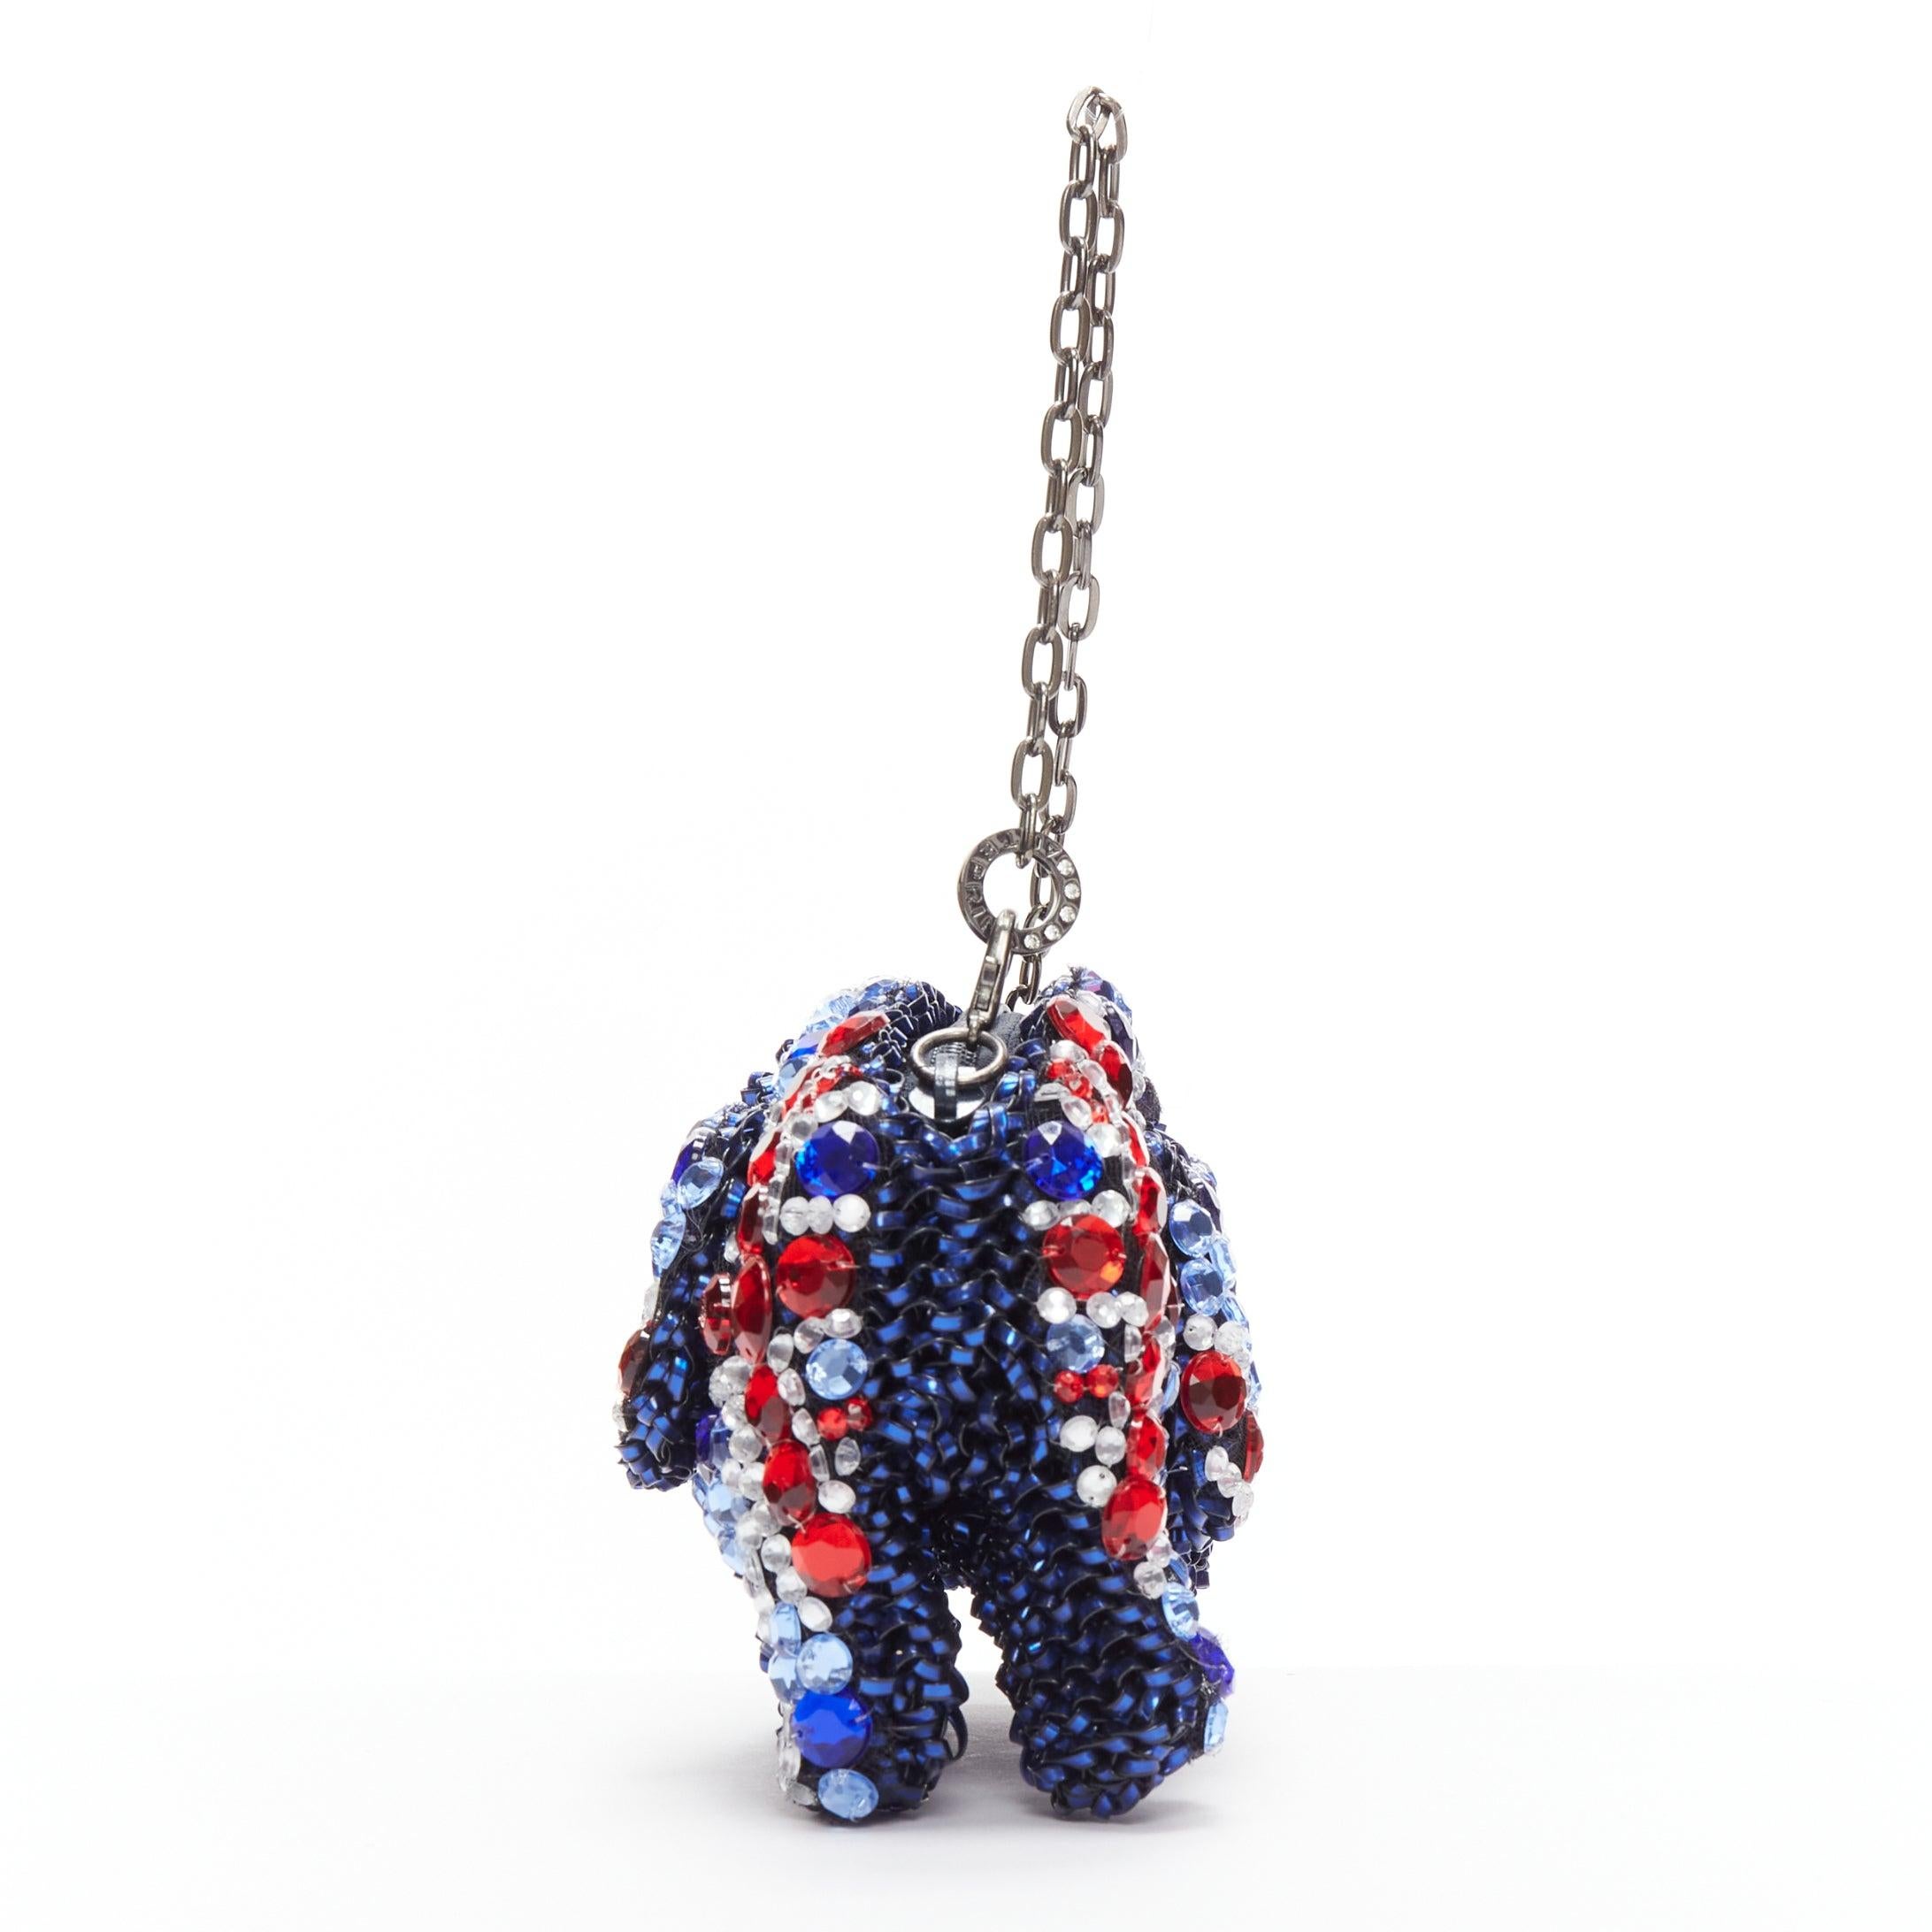 Women's rare ANTEPRIMA Wire Bag blue red crystal Union Jack elephant clutch For Sale